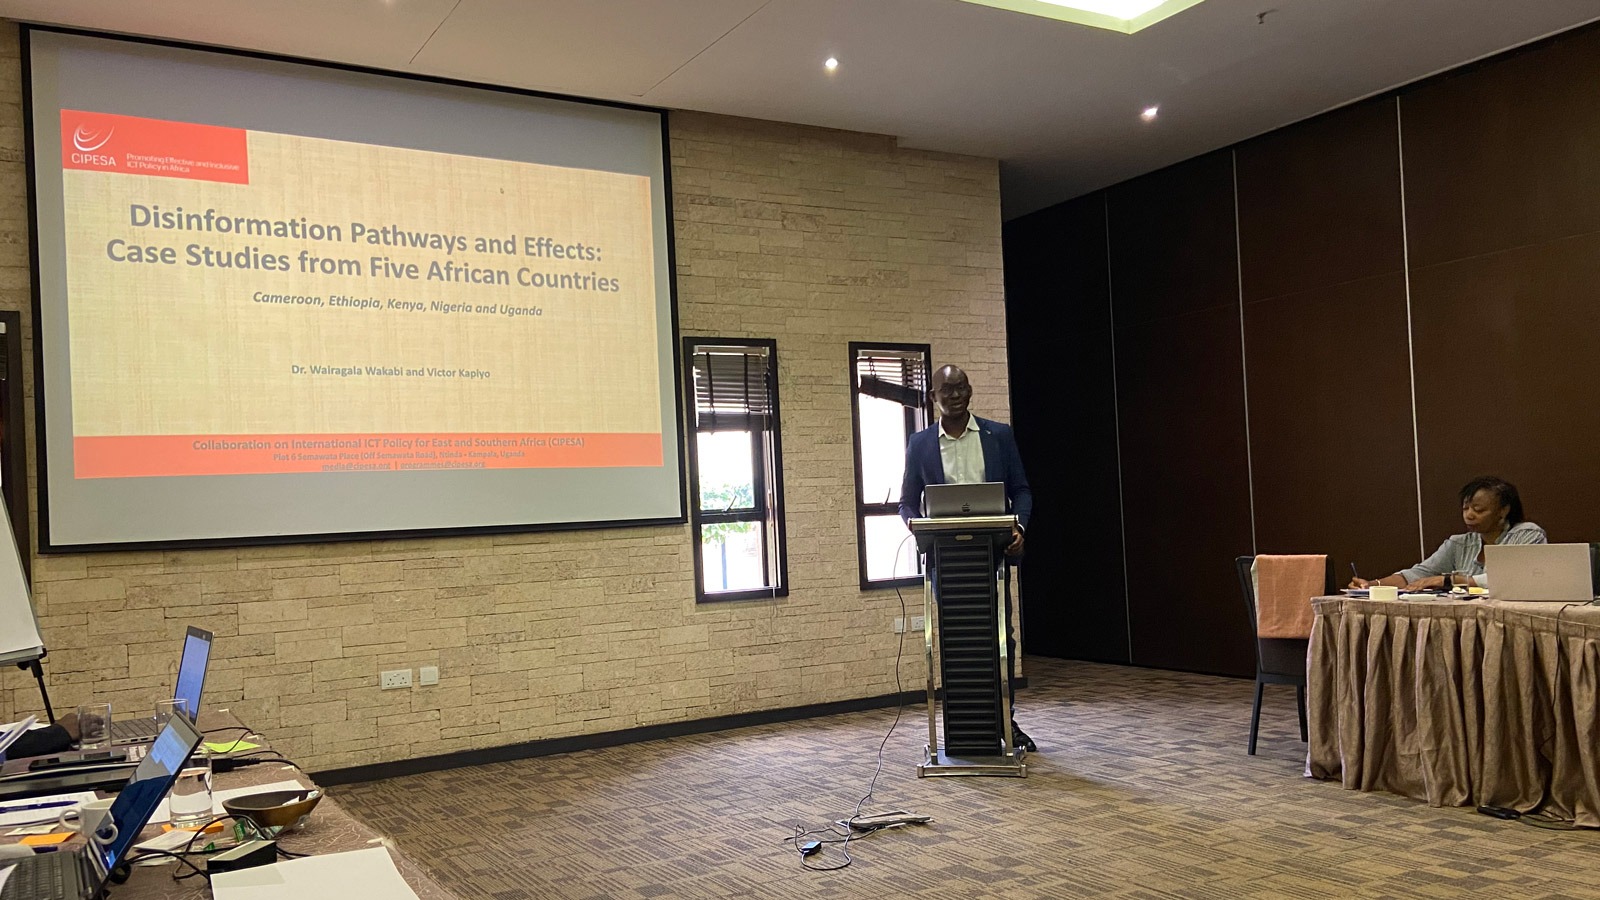 Victor Kapiyo (CIPESA, Kenya) presenting findings from CIPESA’s study „Lessons learnt: Disinformation Pathways and Effects”.